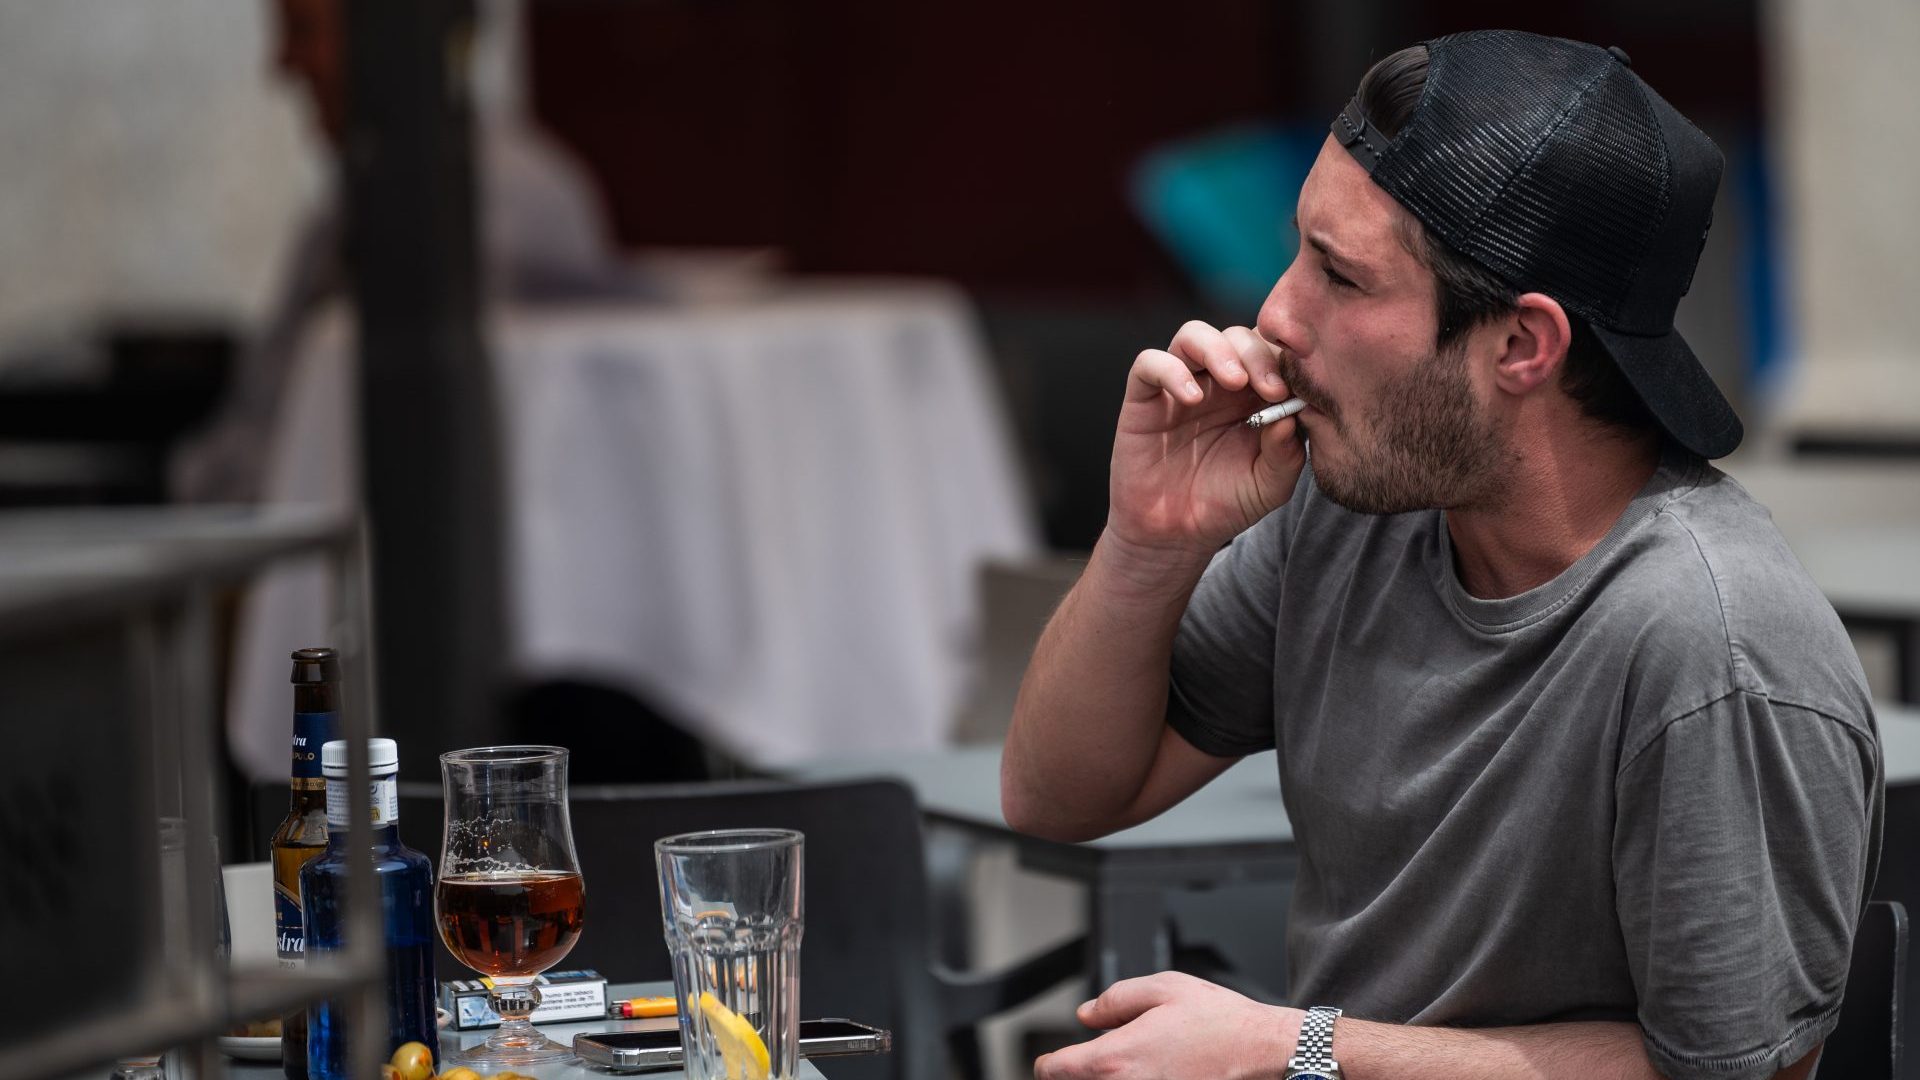 A man smokes on a terrace in Madrid – but maybe not for much longer. Photo: Marcos del Mazo/LightRocket/Getty